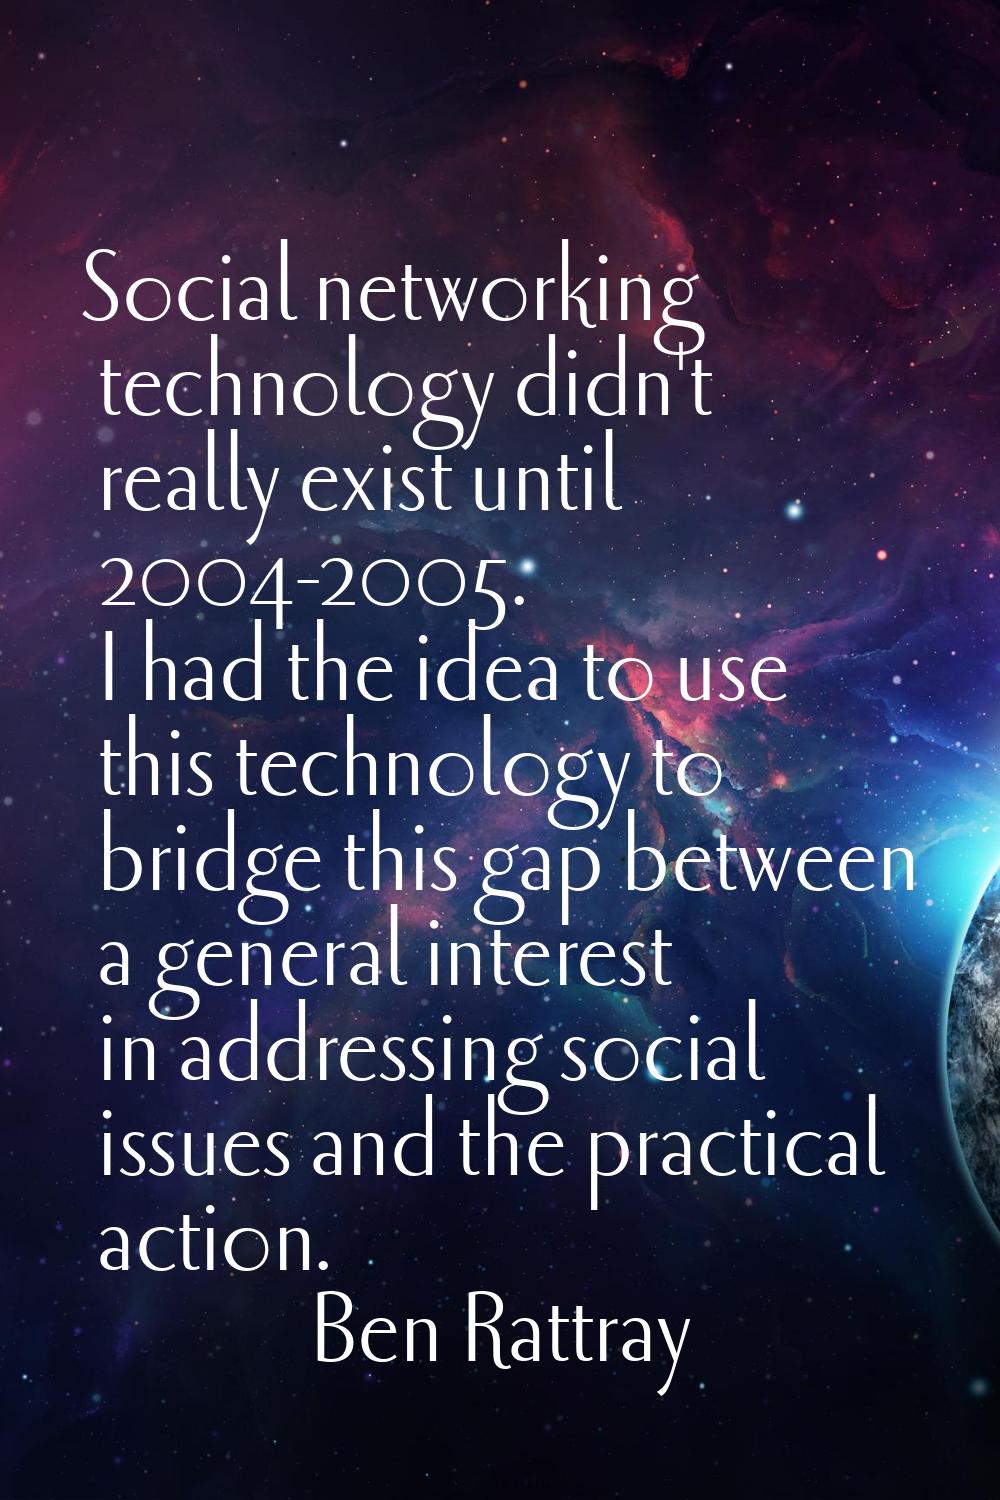 Social networking technology didn't really exist until 2004-2005. I had the idea to use this techno